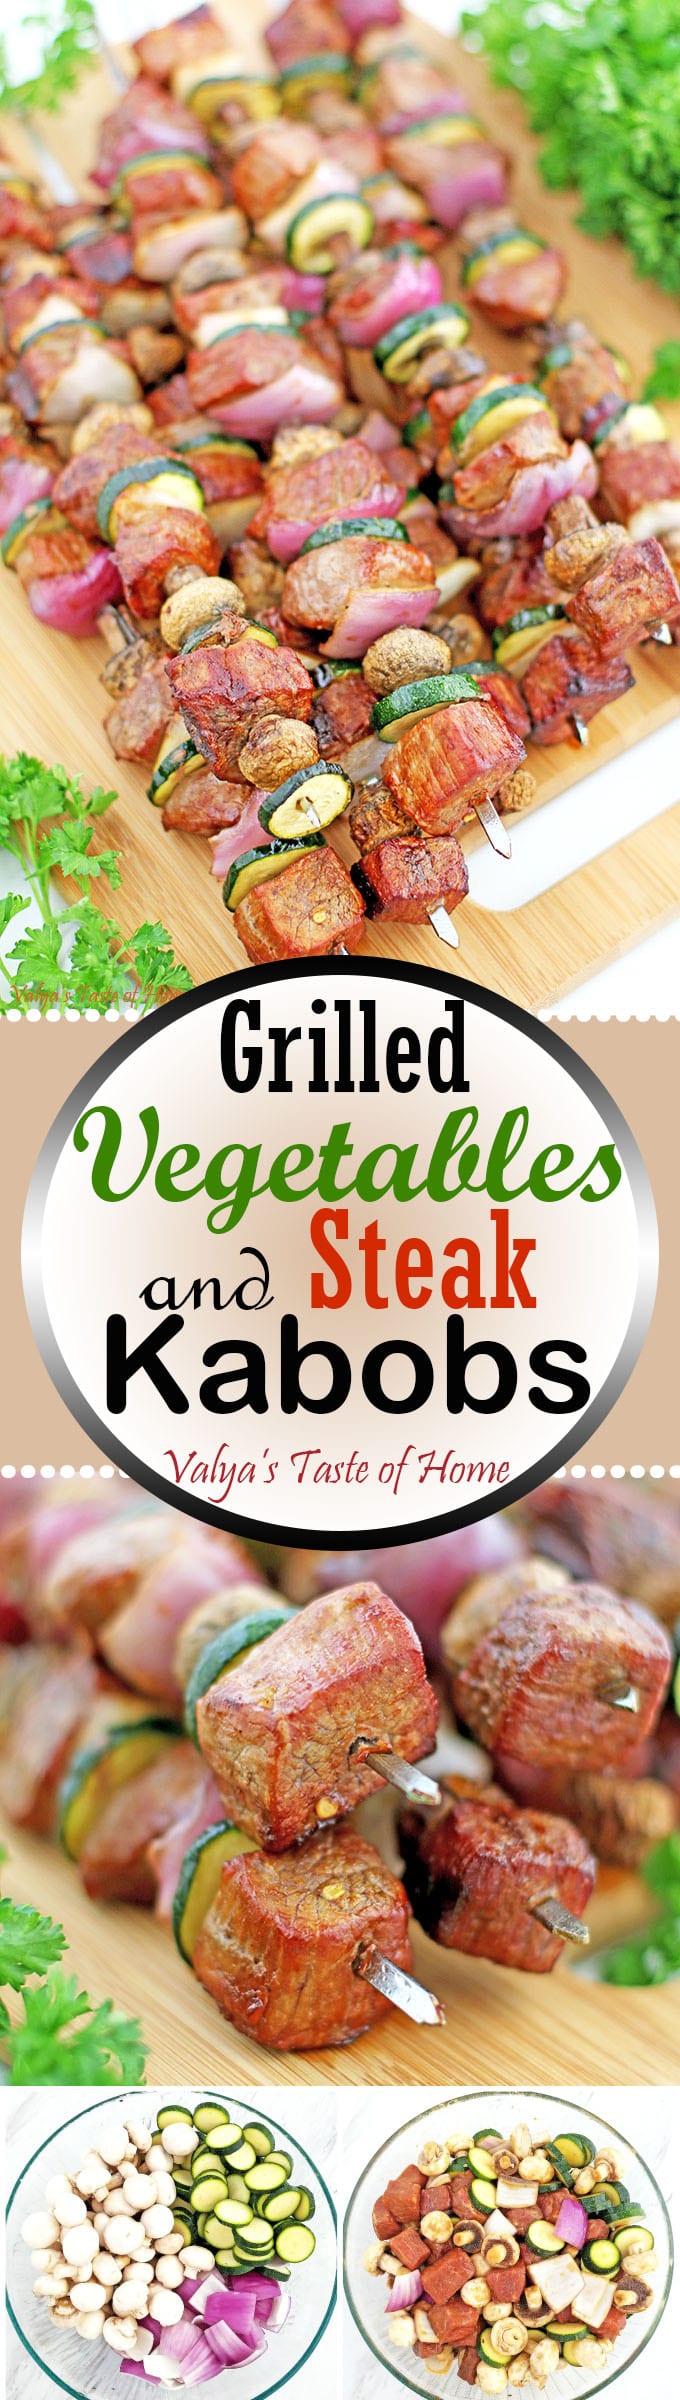 This Grilled Vegetables and Steak Kabobs Recipe is a fun and fancy way of changing it up for dinner and eating more vegetables. When grilled on sticks with meat, vegetables take on a new appeal and eaten more readily by kids. And of course, adults just can’t get enough of it. Grilled veggies bursting with flavor and still has a slight crunch of freshness are some of the best things about summer.